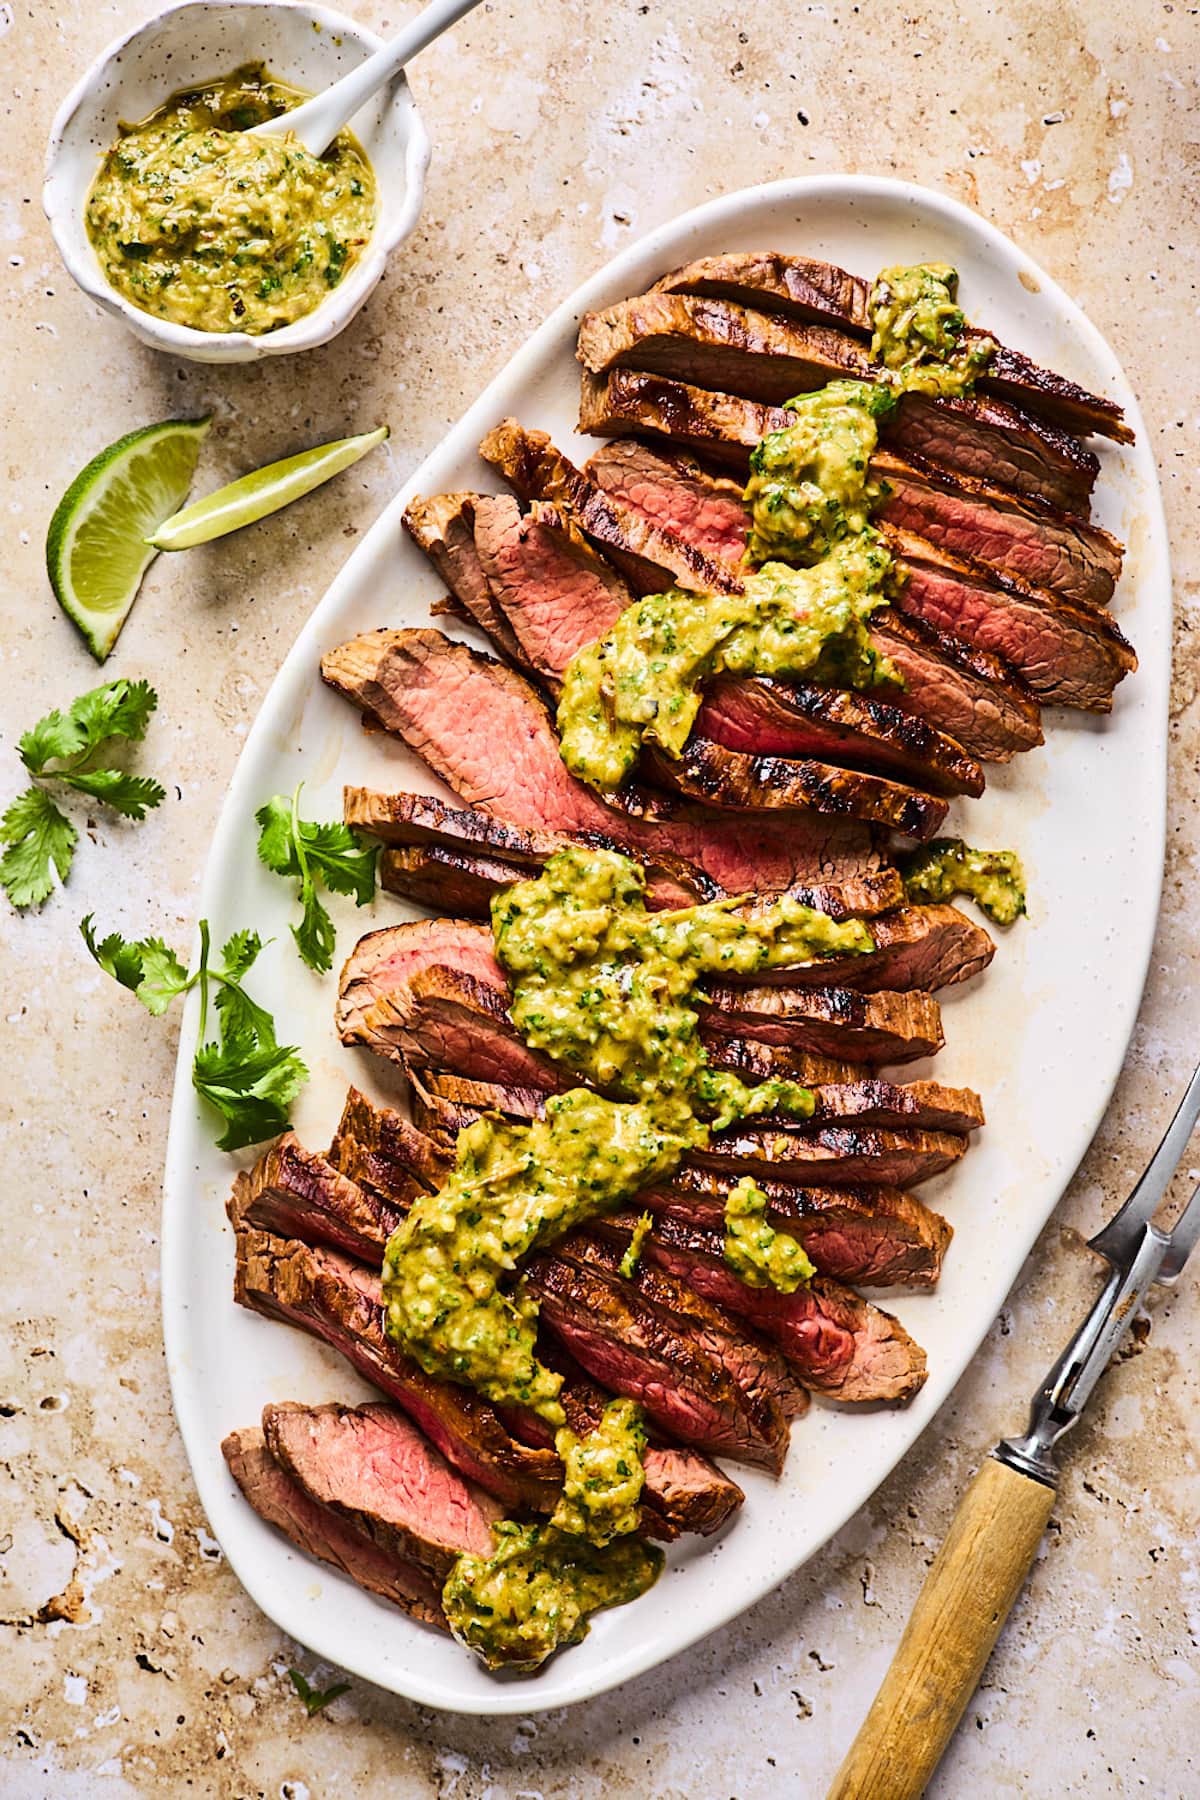 The Best Smoked Flank Steak (with Chimichurri Sauce!)